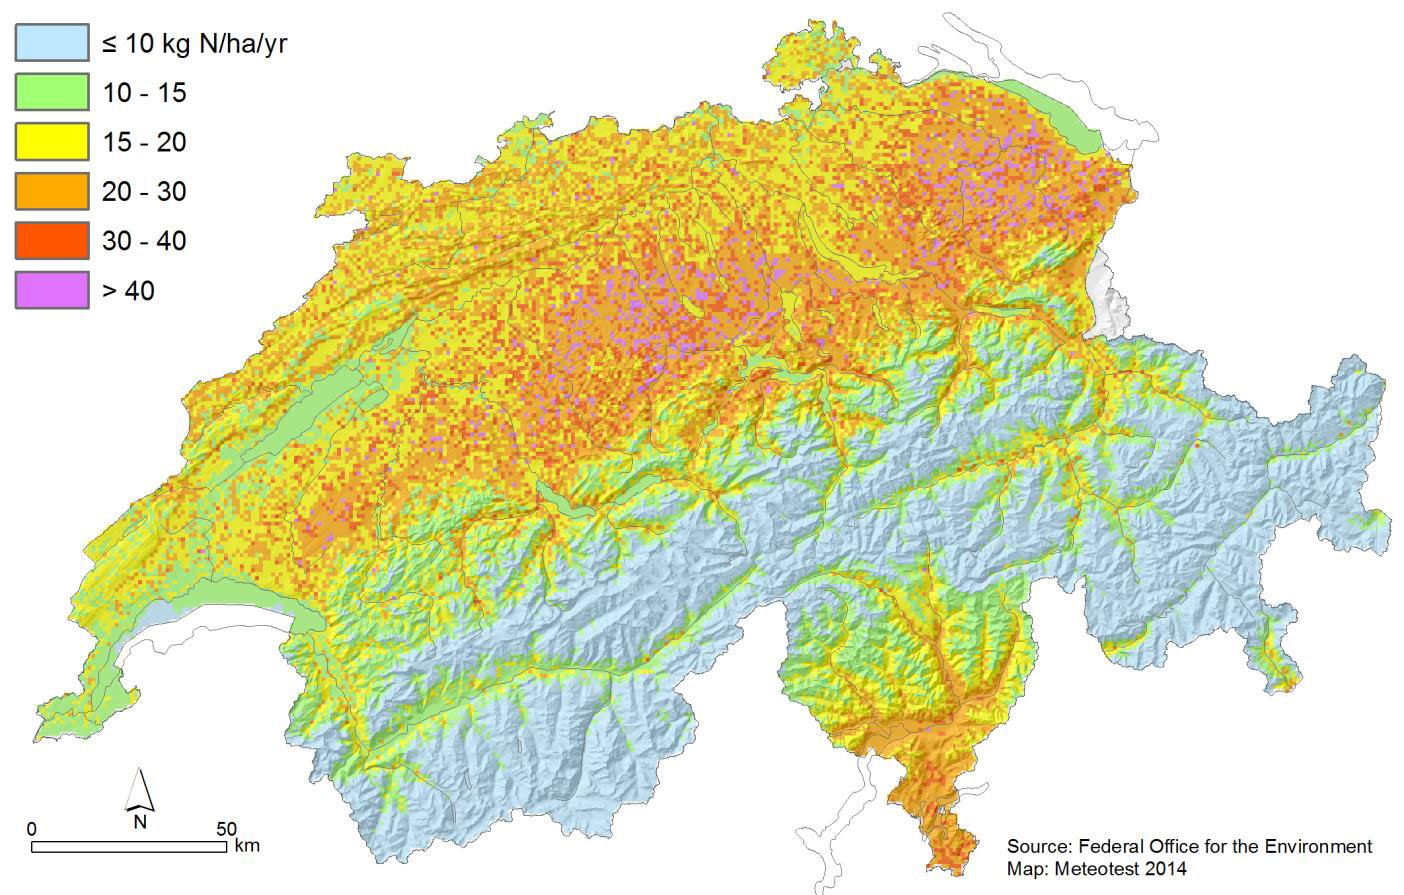 Emissions produced in agriculture are responsible for two thirds of the nitrogen deposition in Switzerland. Nitrogen oxides produces by burning of fossil fuels are responsible for the other third.